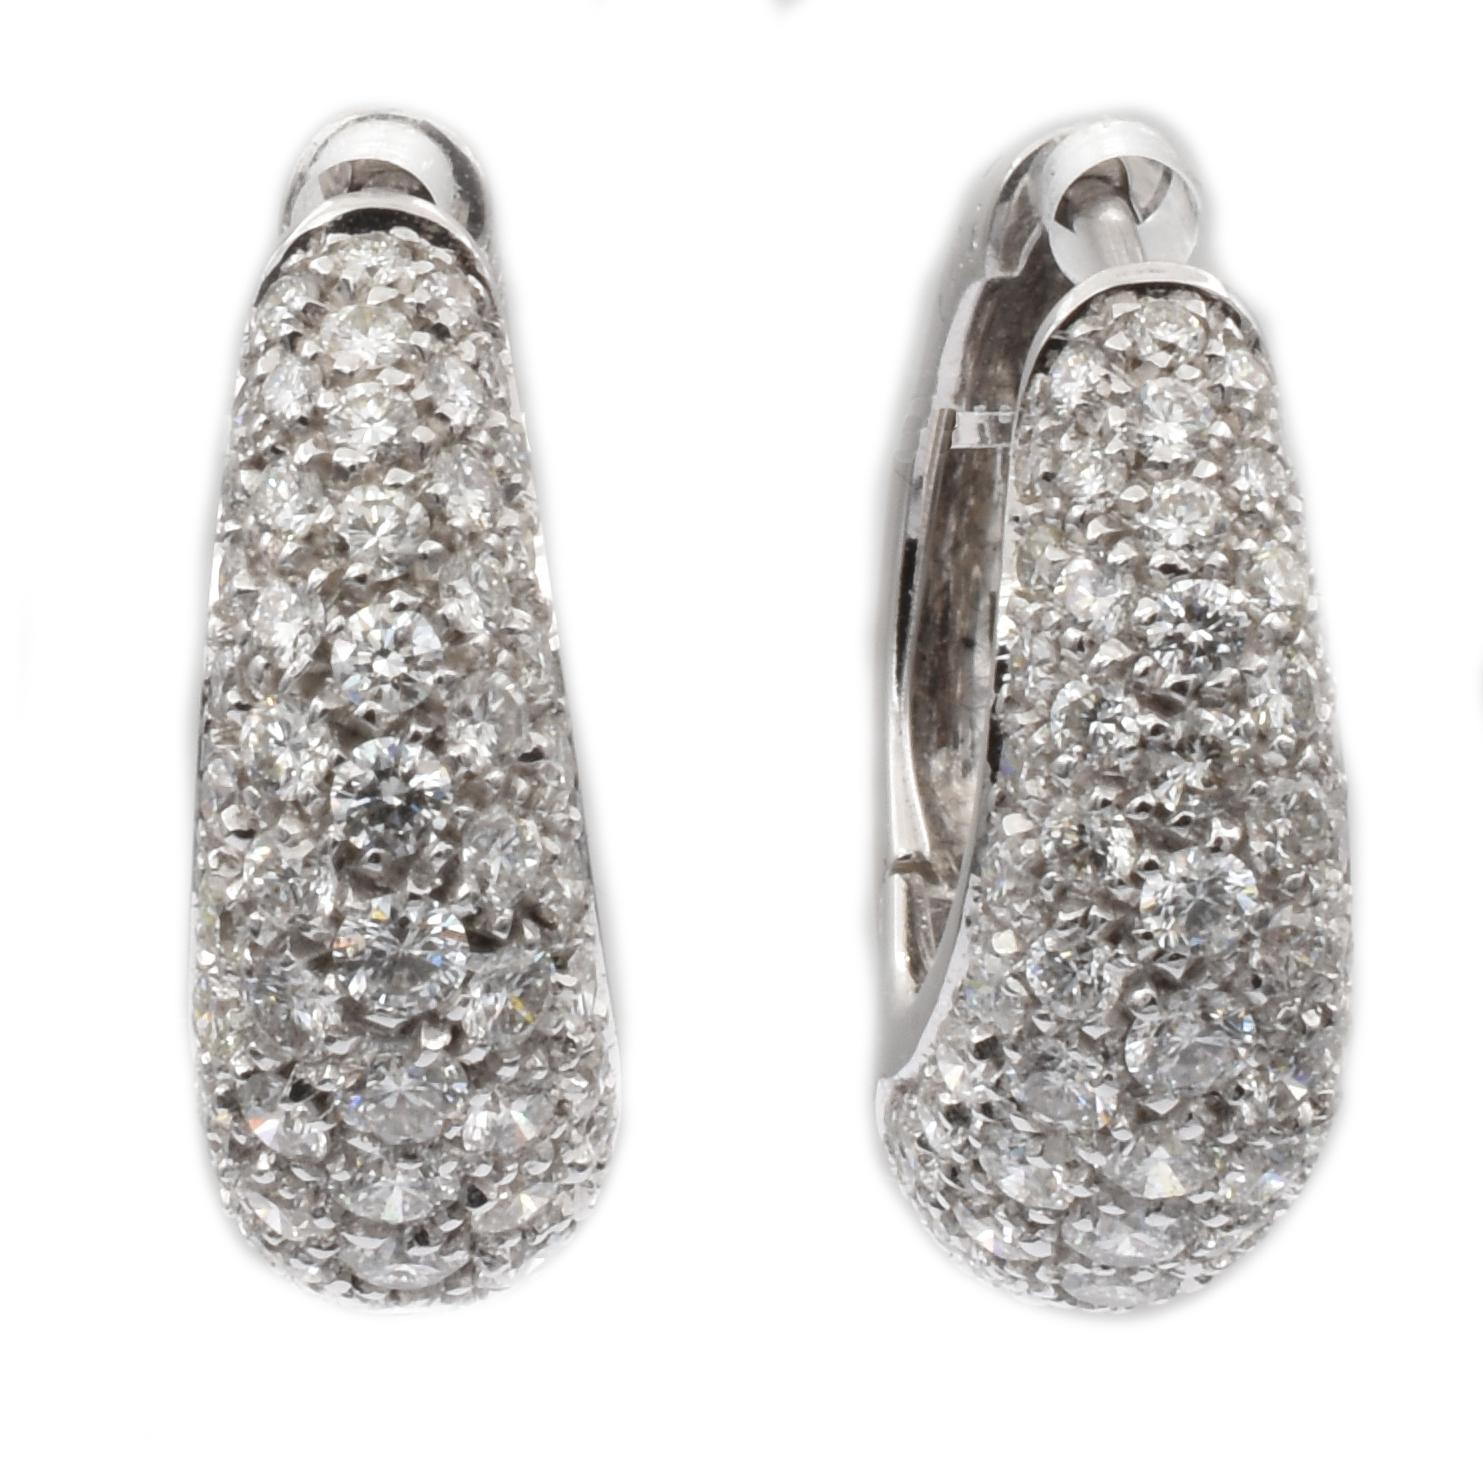 Gilberto Cassola 18Kt White Gold Hoop Earrings with White Diamonds.
Handmade in Italy in our Atelier in Valenza (AL).
Classy and Elegant Earrings perfect for an everyday use. a Perfect mach with our ref. 0752 Ring.
18Kt Gold g 11.60
G Color Vs